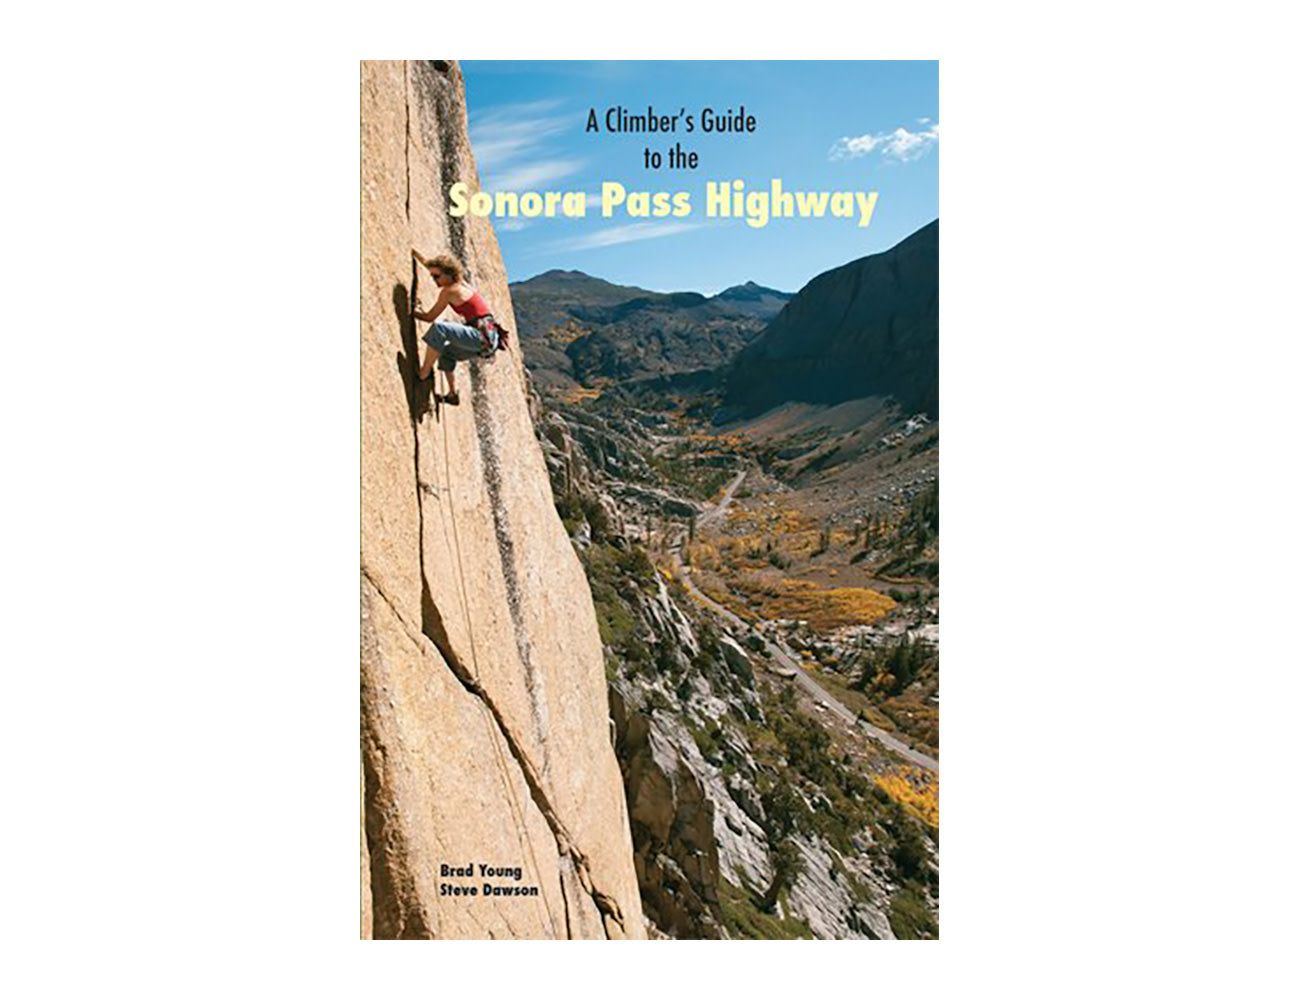 A Climbing Guide to the Sonora Pass Highway